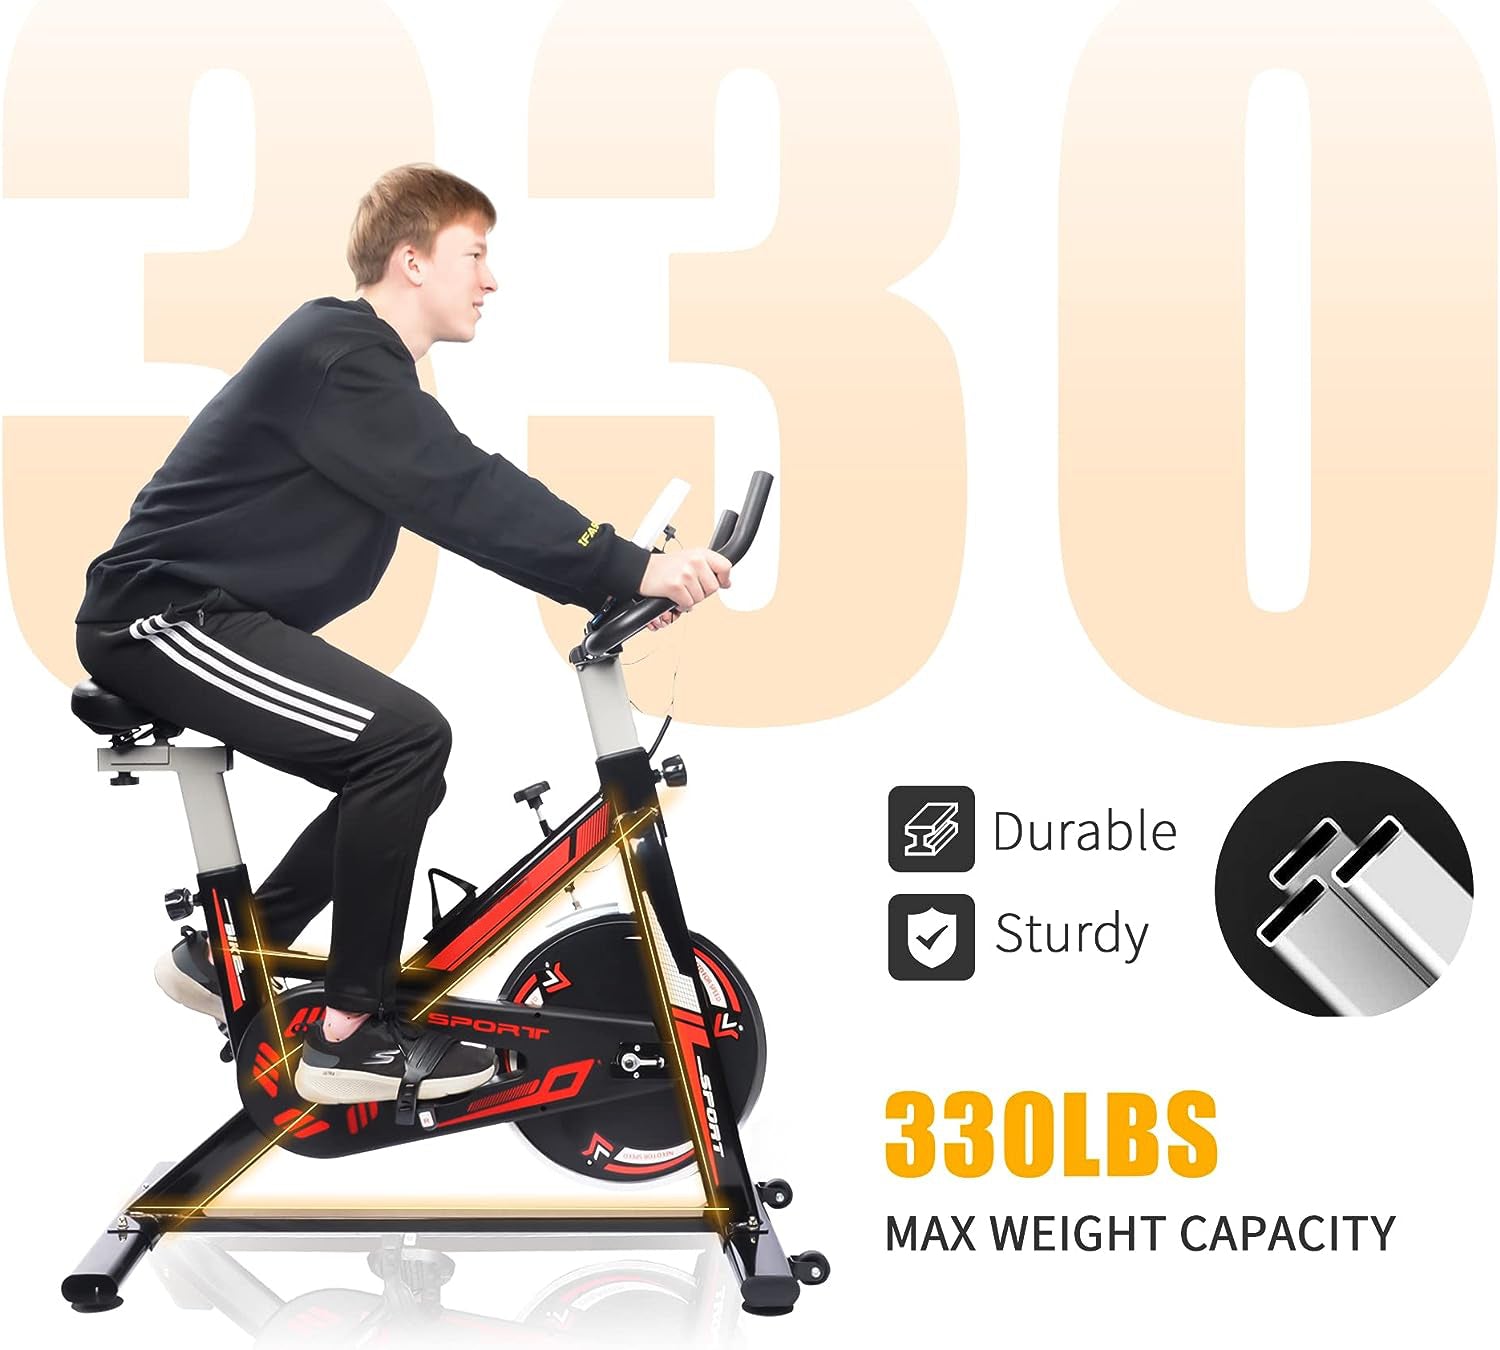 UltimateFit Exercise Stationary Bike - 330 lbs Weight Capacity_4